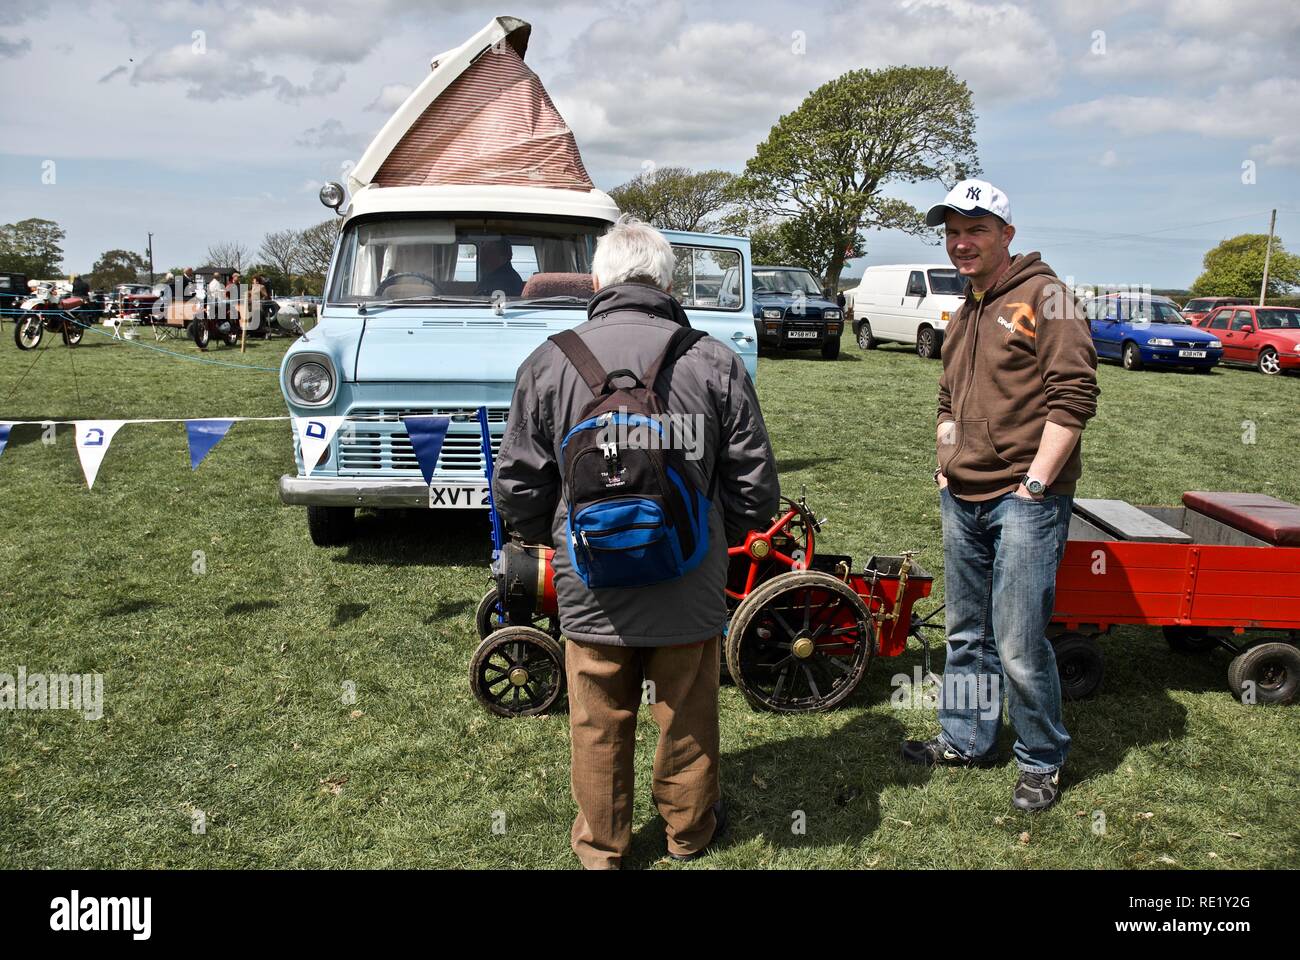 Spectators enjoy the Anglesey Vintage Rally, Anglesey, North Wales, UK, May 2010 Stock Photo